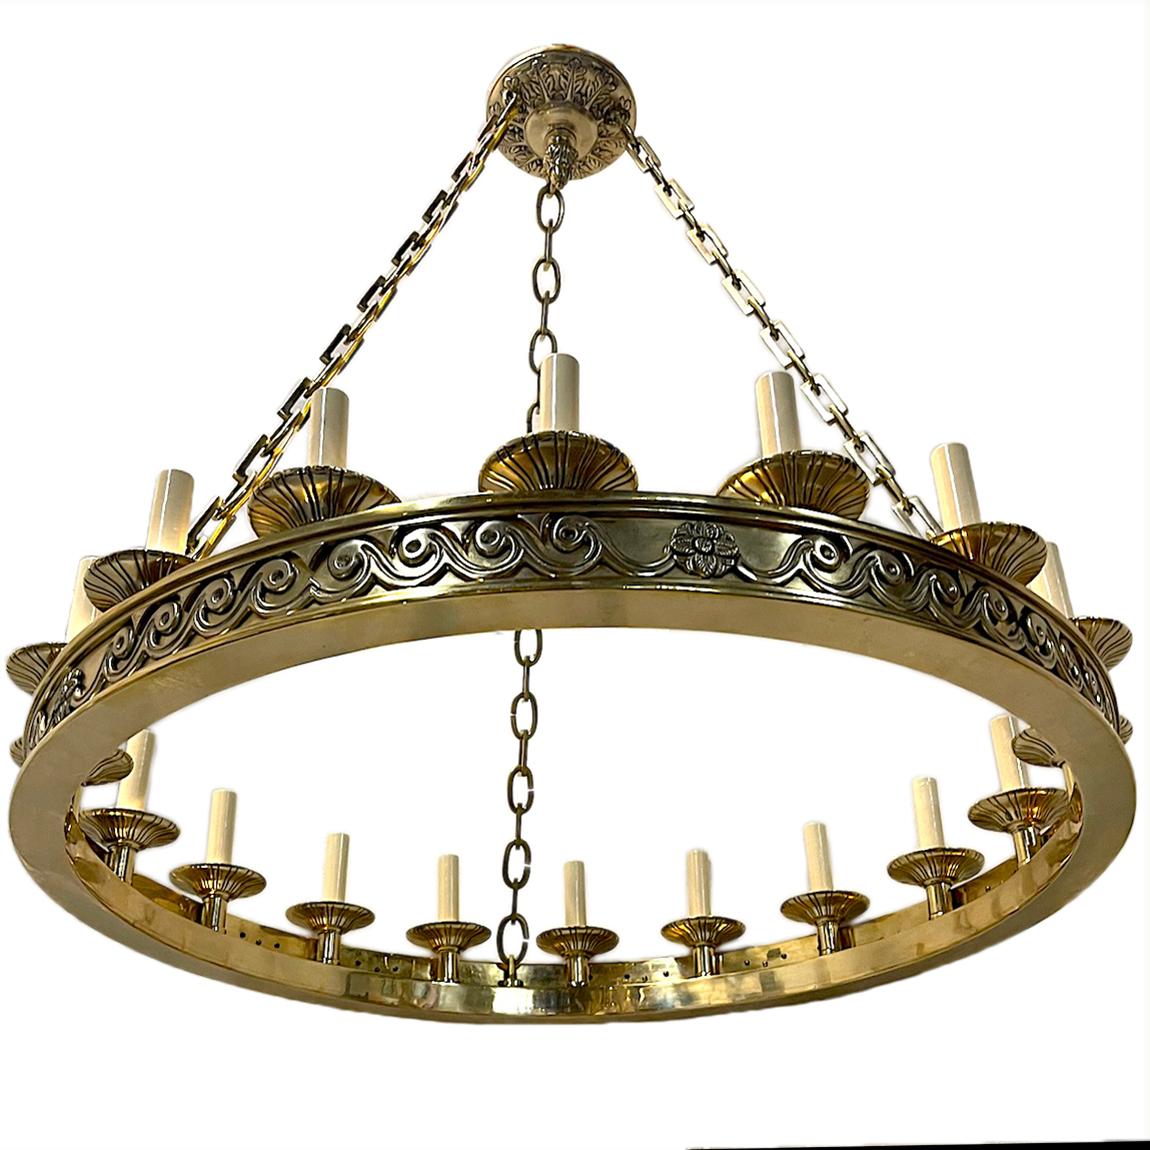 A French, circa 1920 neoclassic-style 18 light chandelier with waves and rosettes details.

Measurements:
Diameter: 32